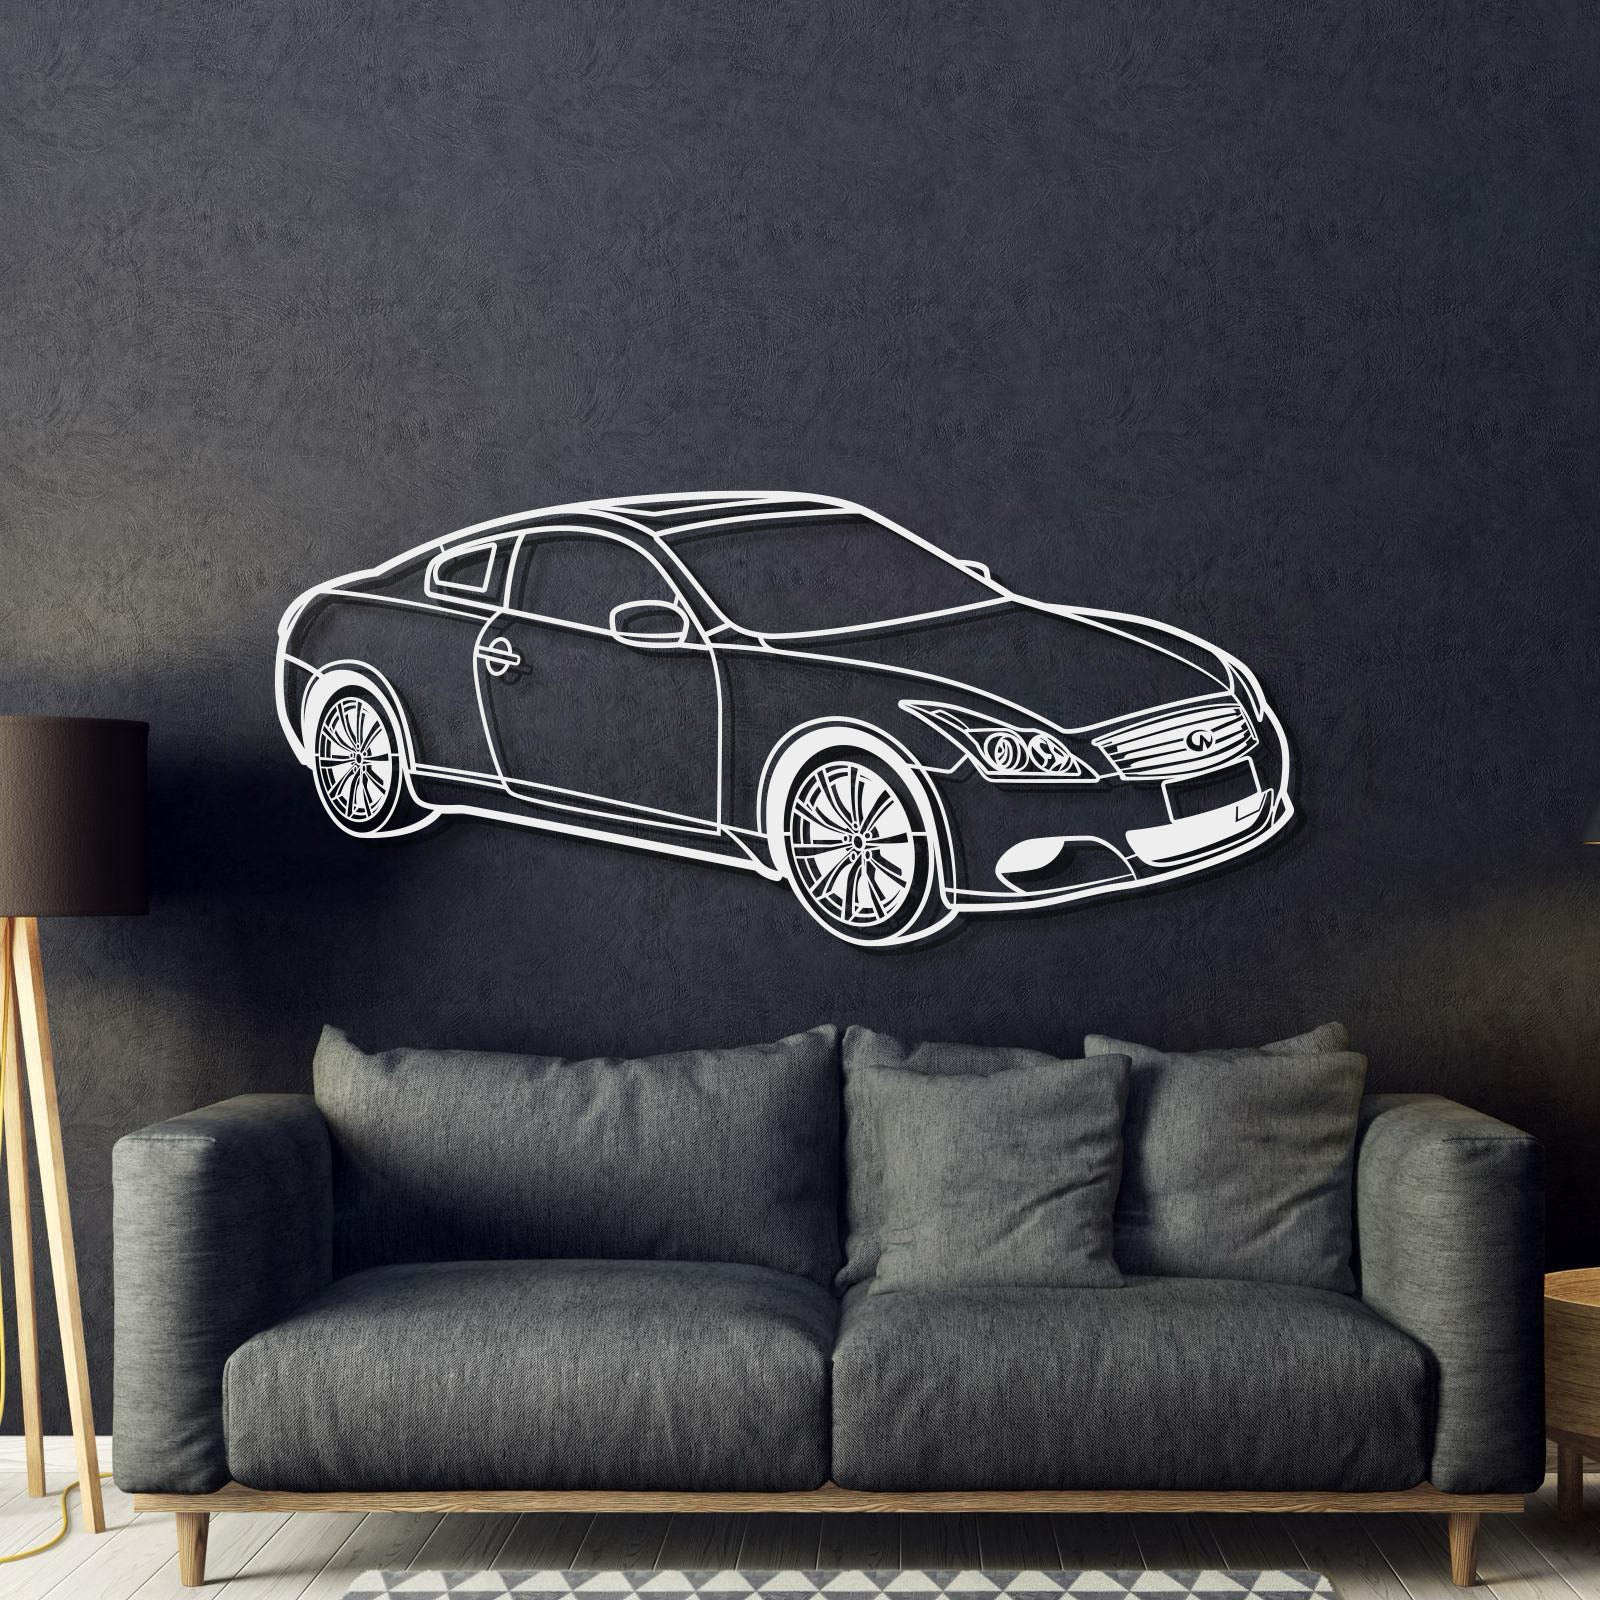 2009 G37 Coupe Perspective Metal Car Wall Art - MT1275